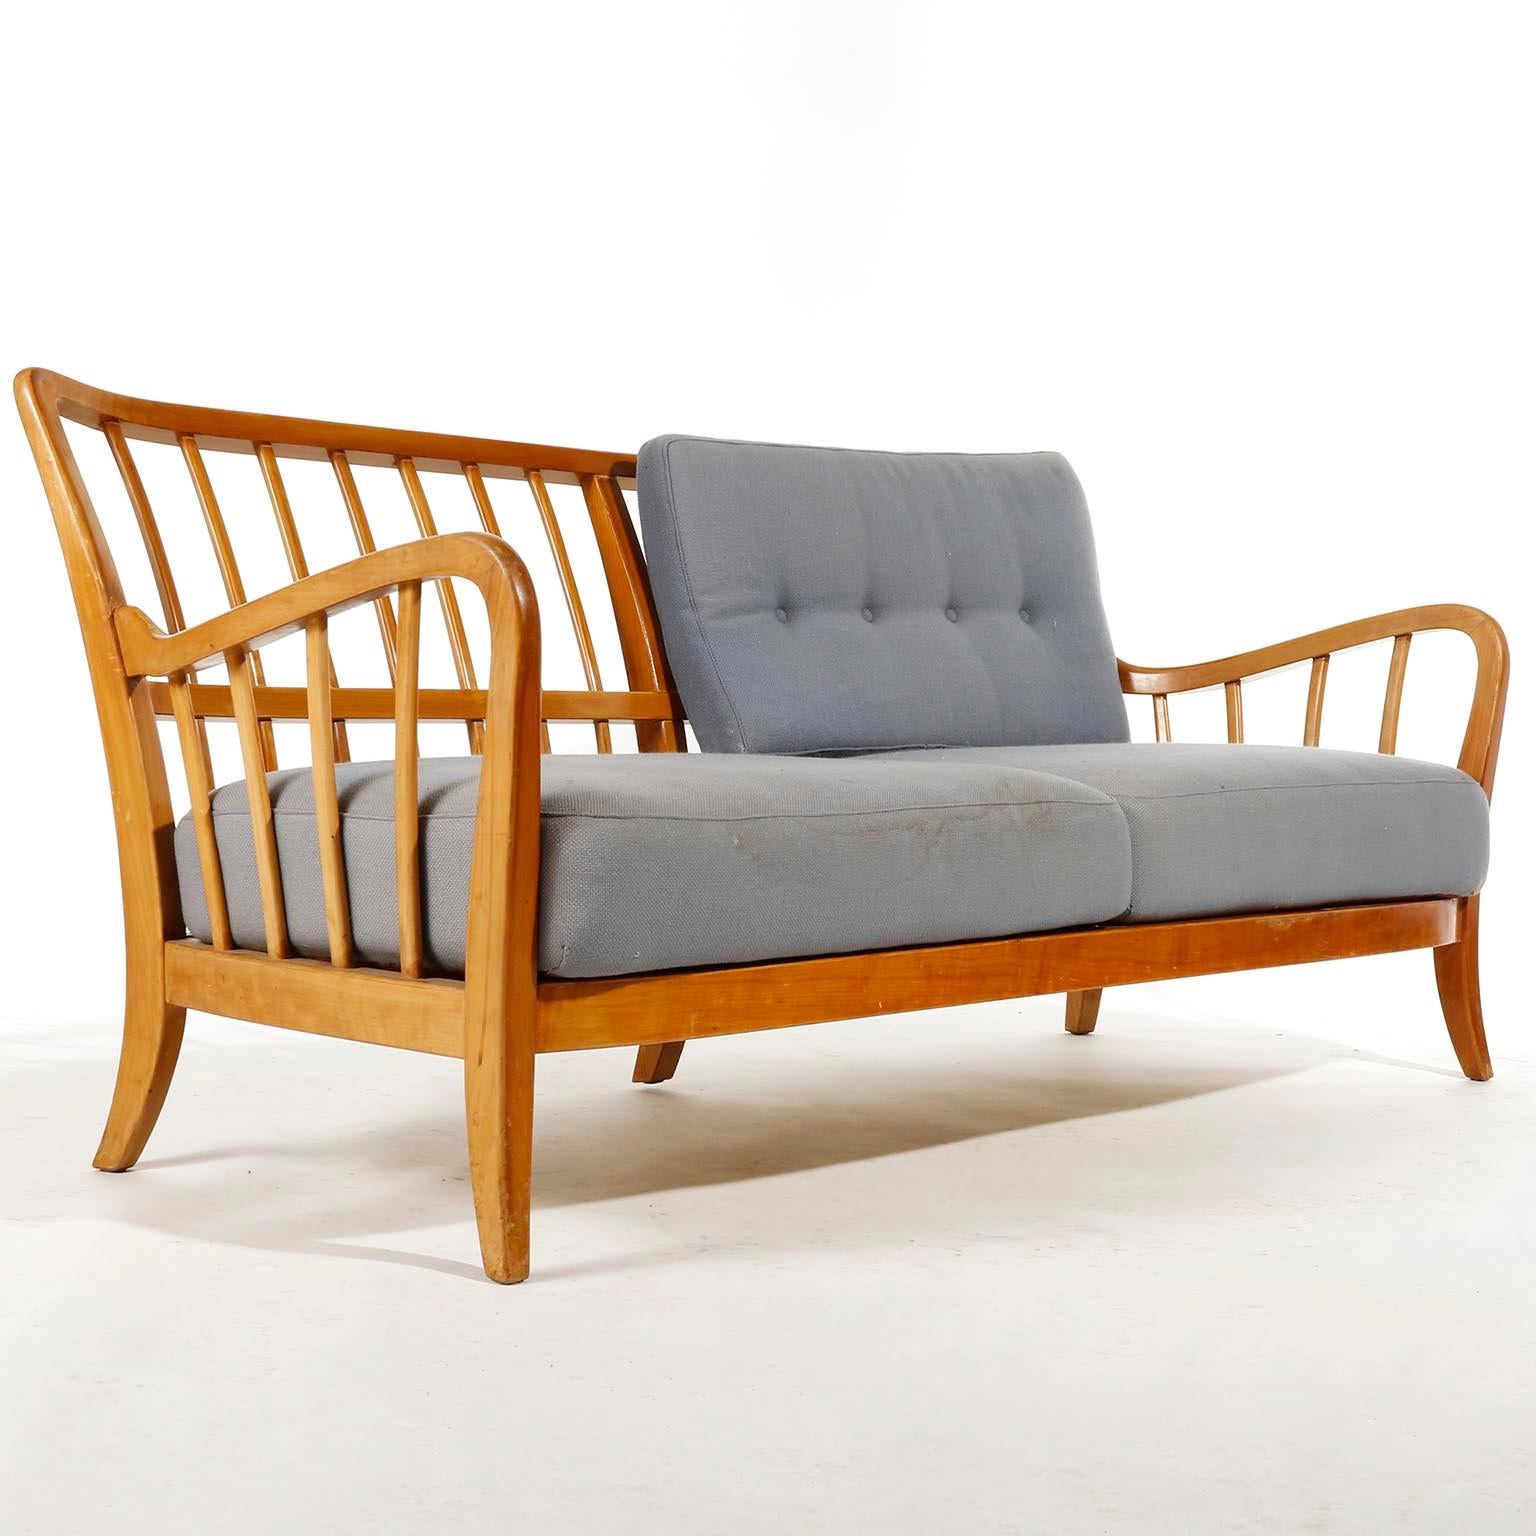 Austrian Bench Seette Seat by Thonet, Attributed to Josef Frank, Wood, 1940 For Sale